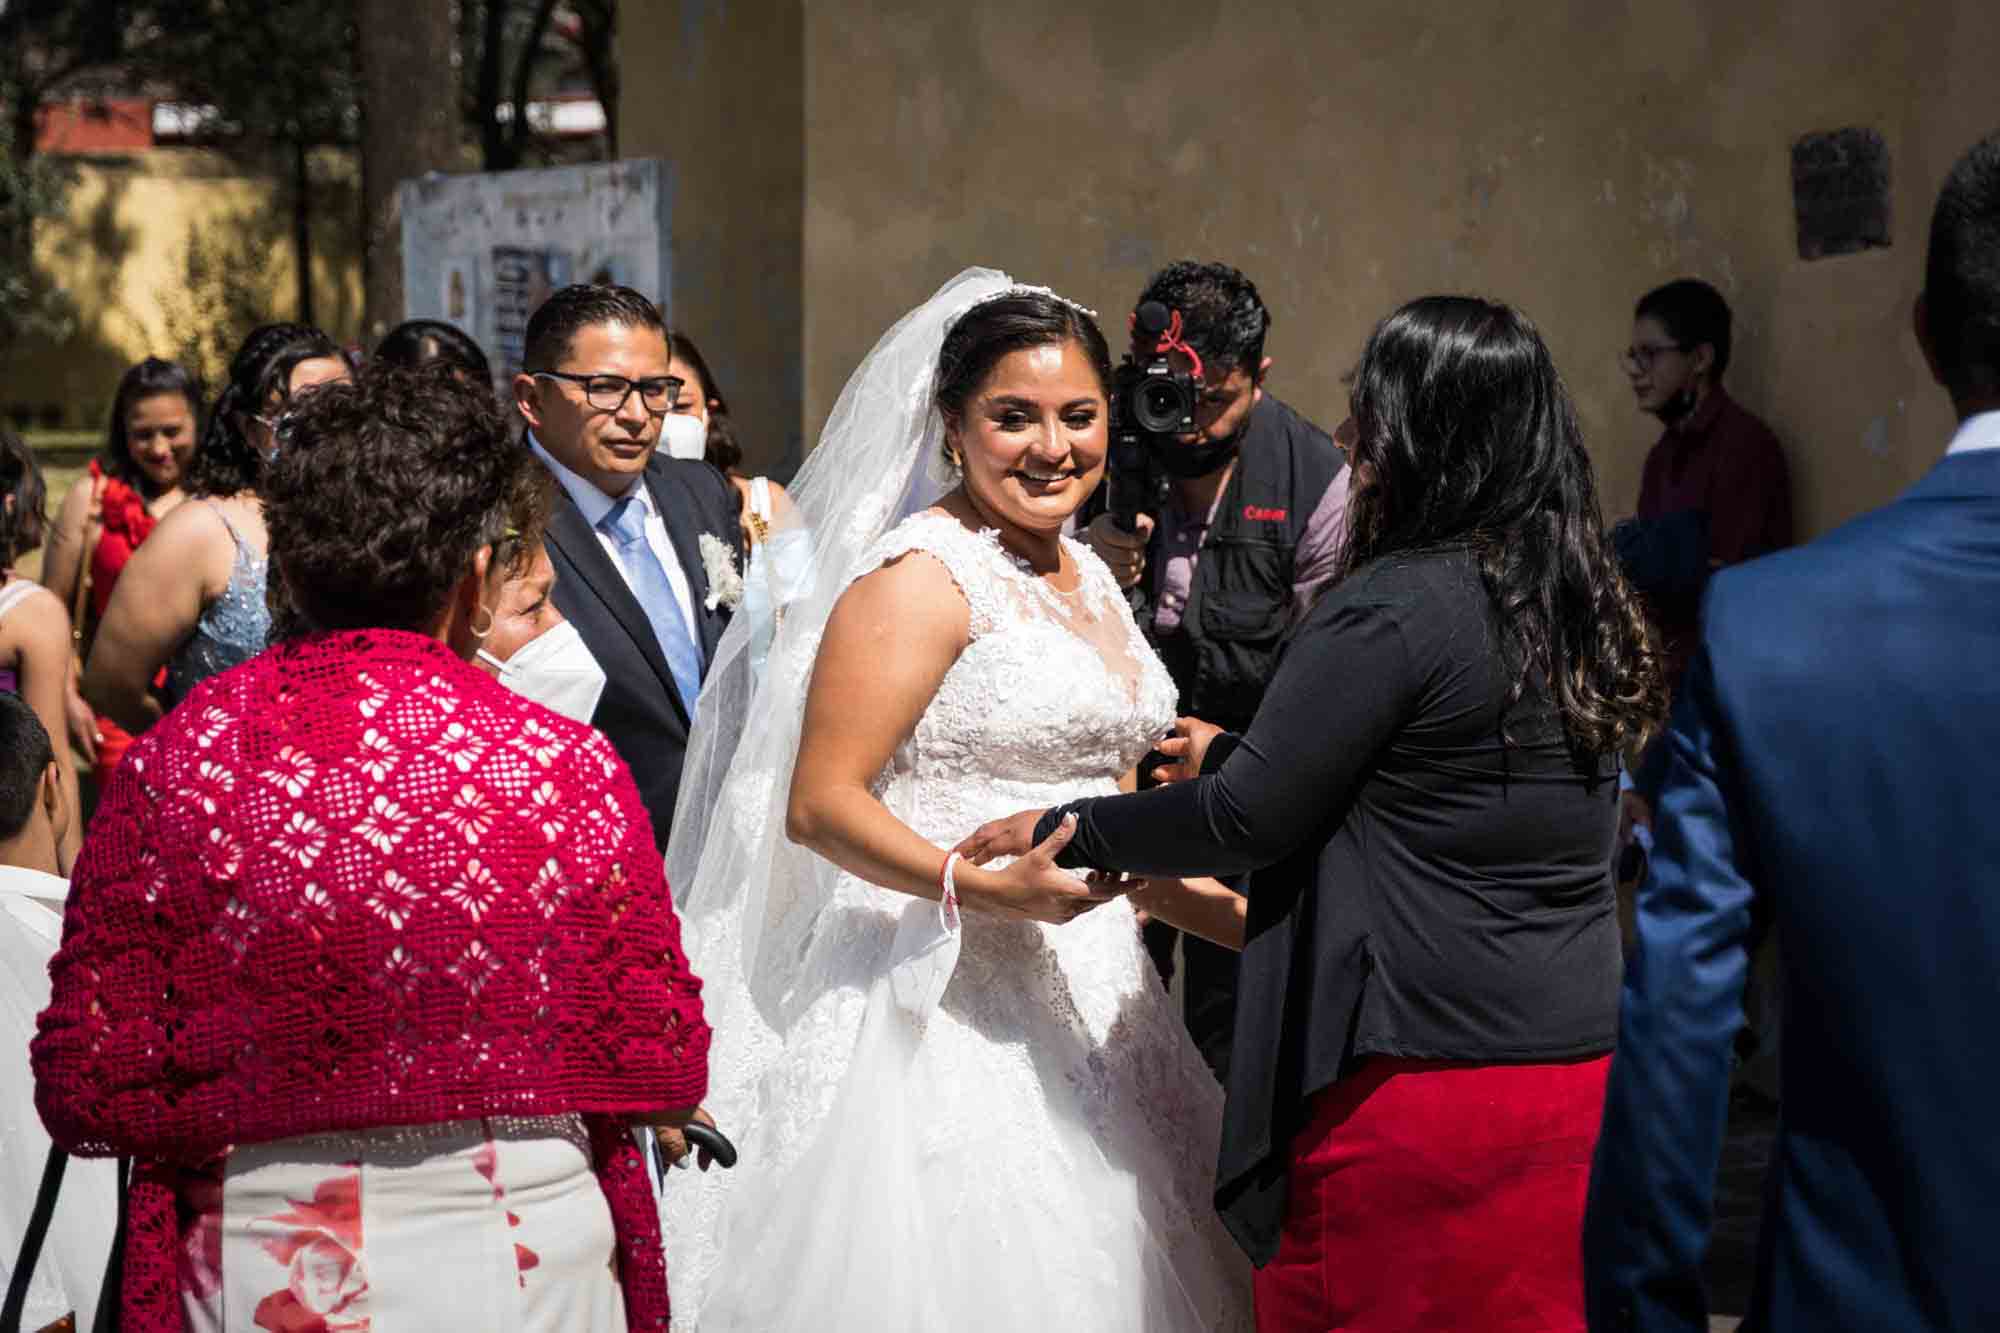 A bride greets her family outside a church in Mexico